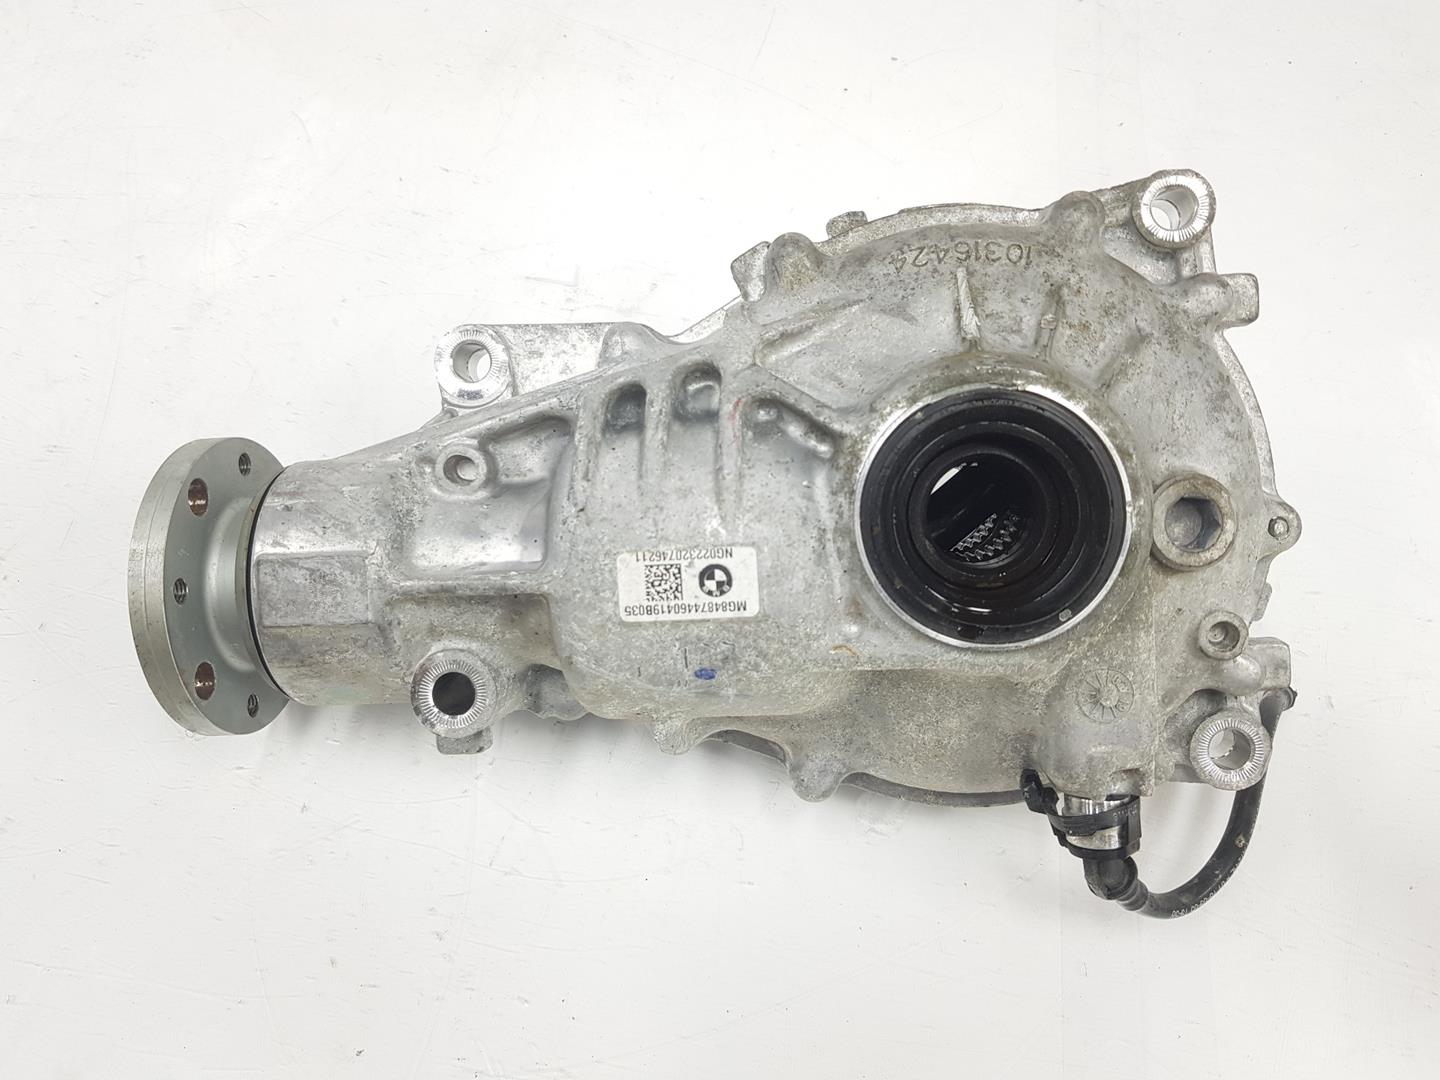 BMW X5 (G05) (2018-present) Front Transfer Case 84874460419, NG022320746211, 1212CD 24135376